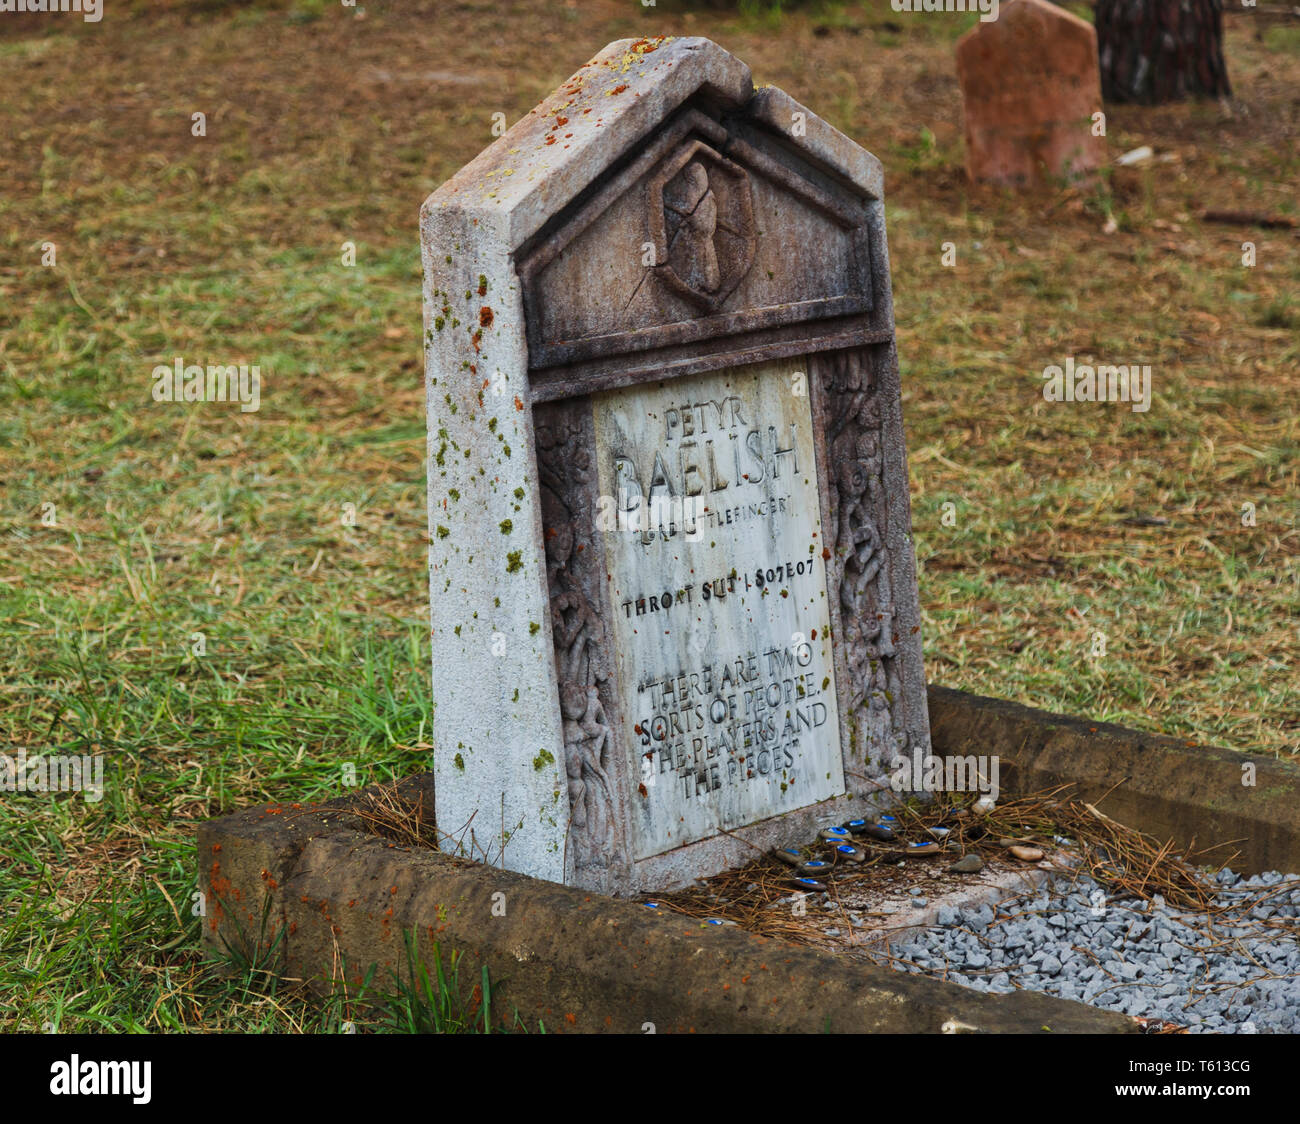 Sydney, Australia - 14 April 2019: Graveyards of Characters from popular TV show Game of Thones. Public unticketed event in Sydney centennial park wit Stock Photo